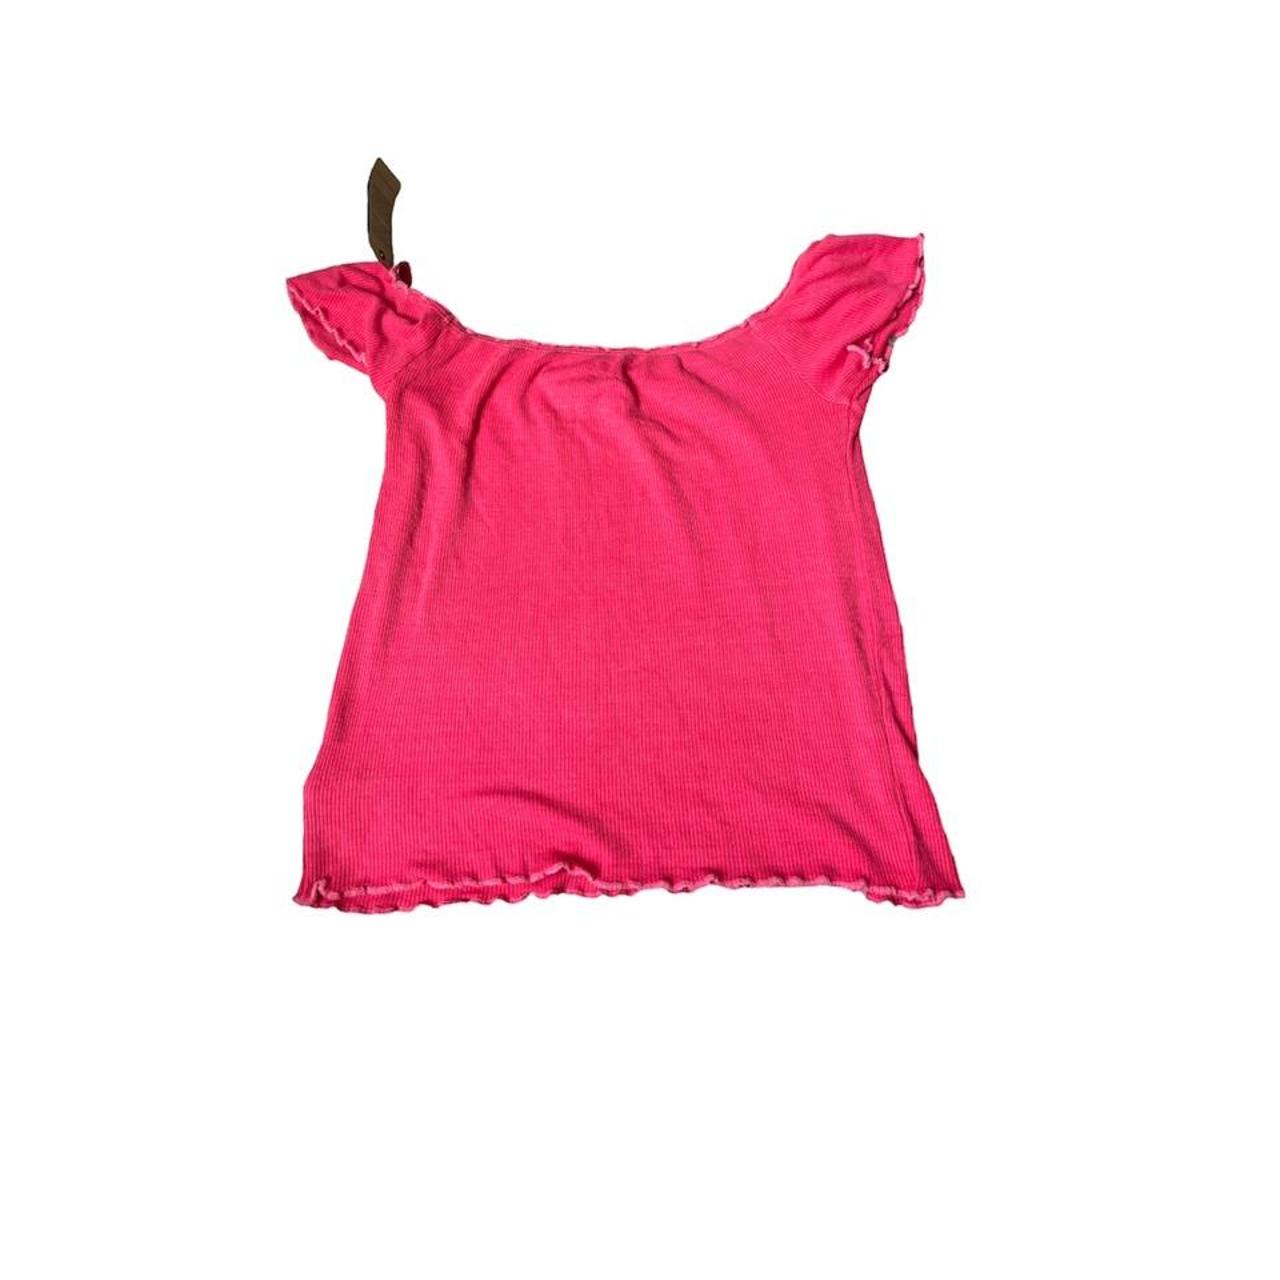 Product Image 2 - American Eagle Outfitters - pink